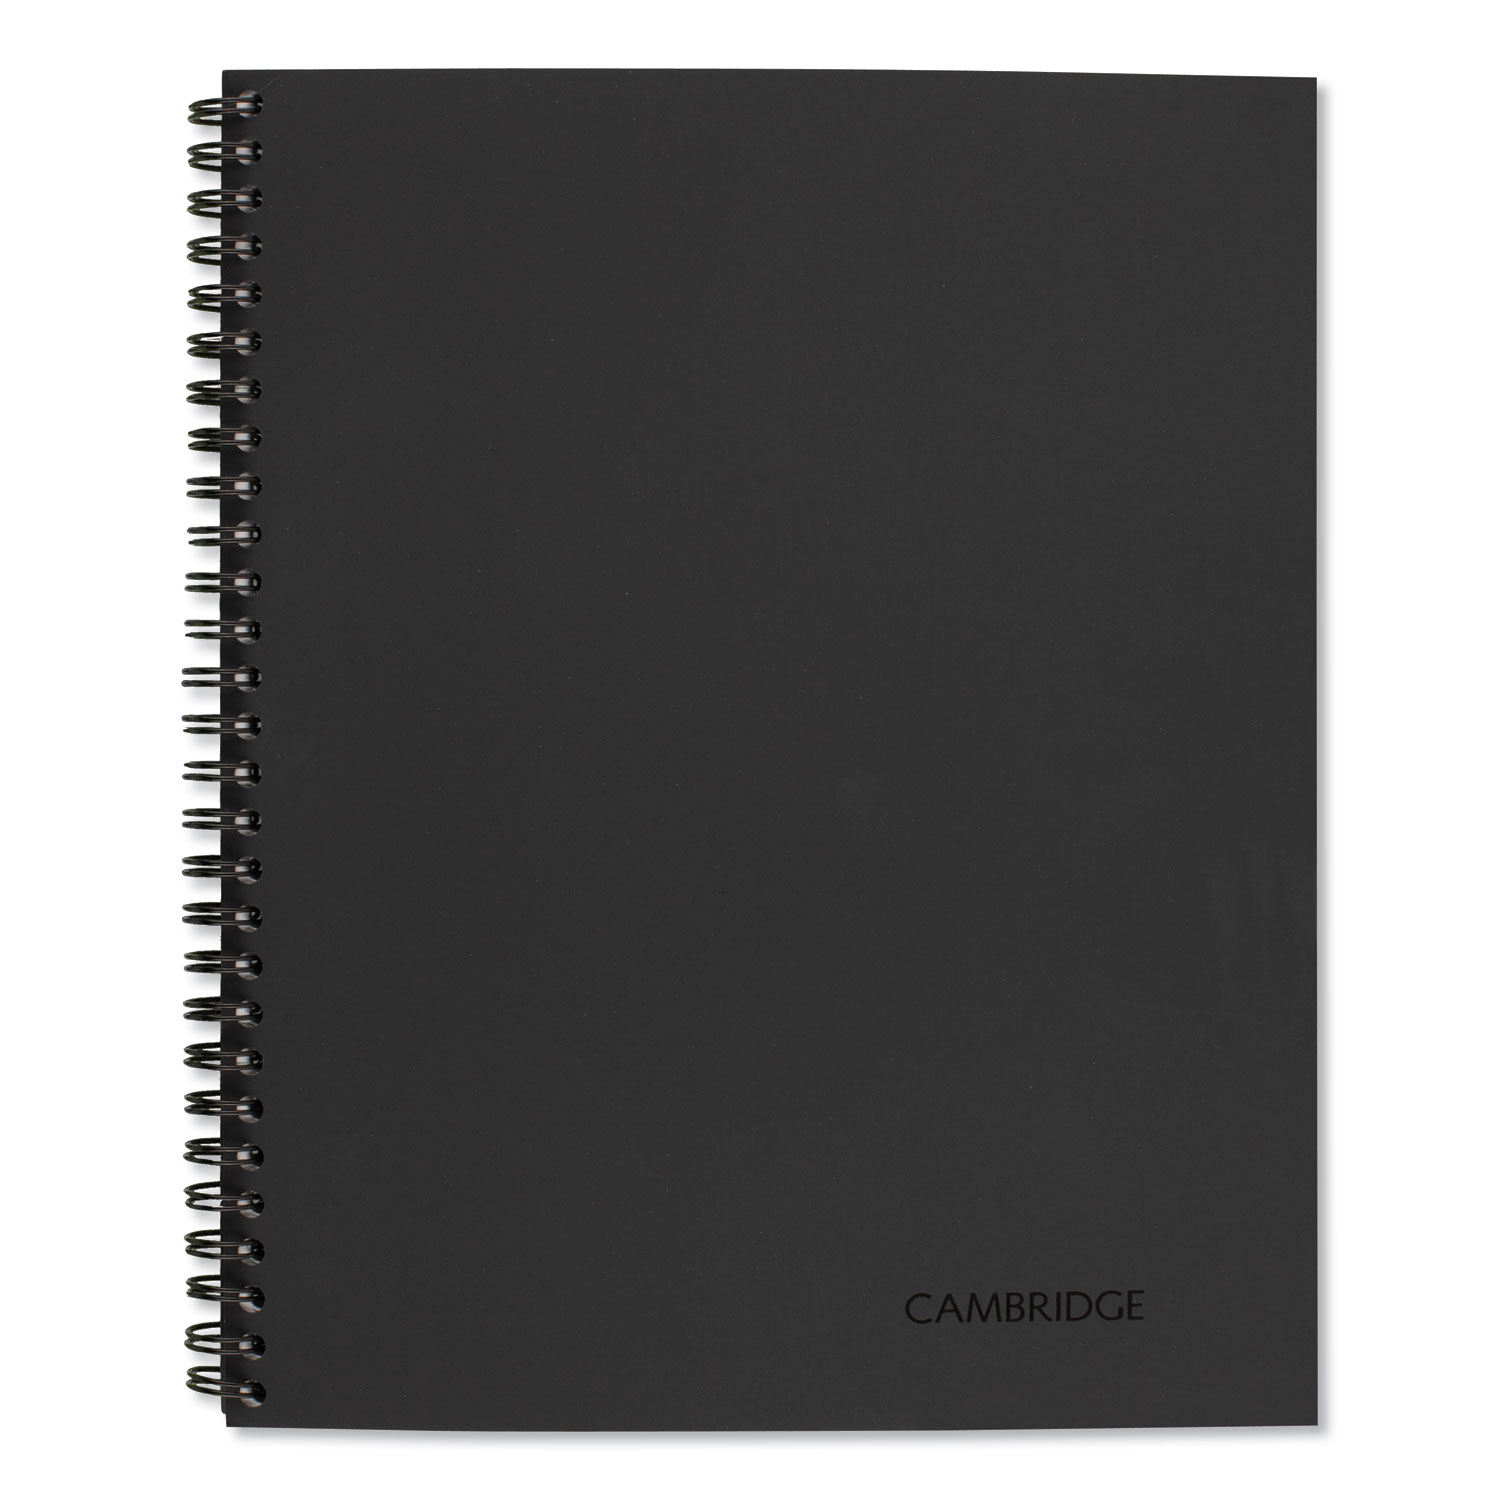  Cambridge 06064 Wirebound Guided Business Notebook, Action Planner, Dark Gray, 11 x 8.5, 80 Sheets (MEA06064) 